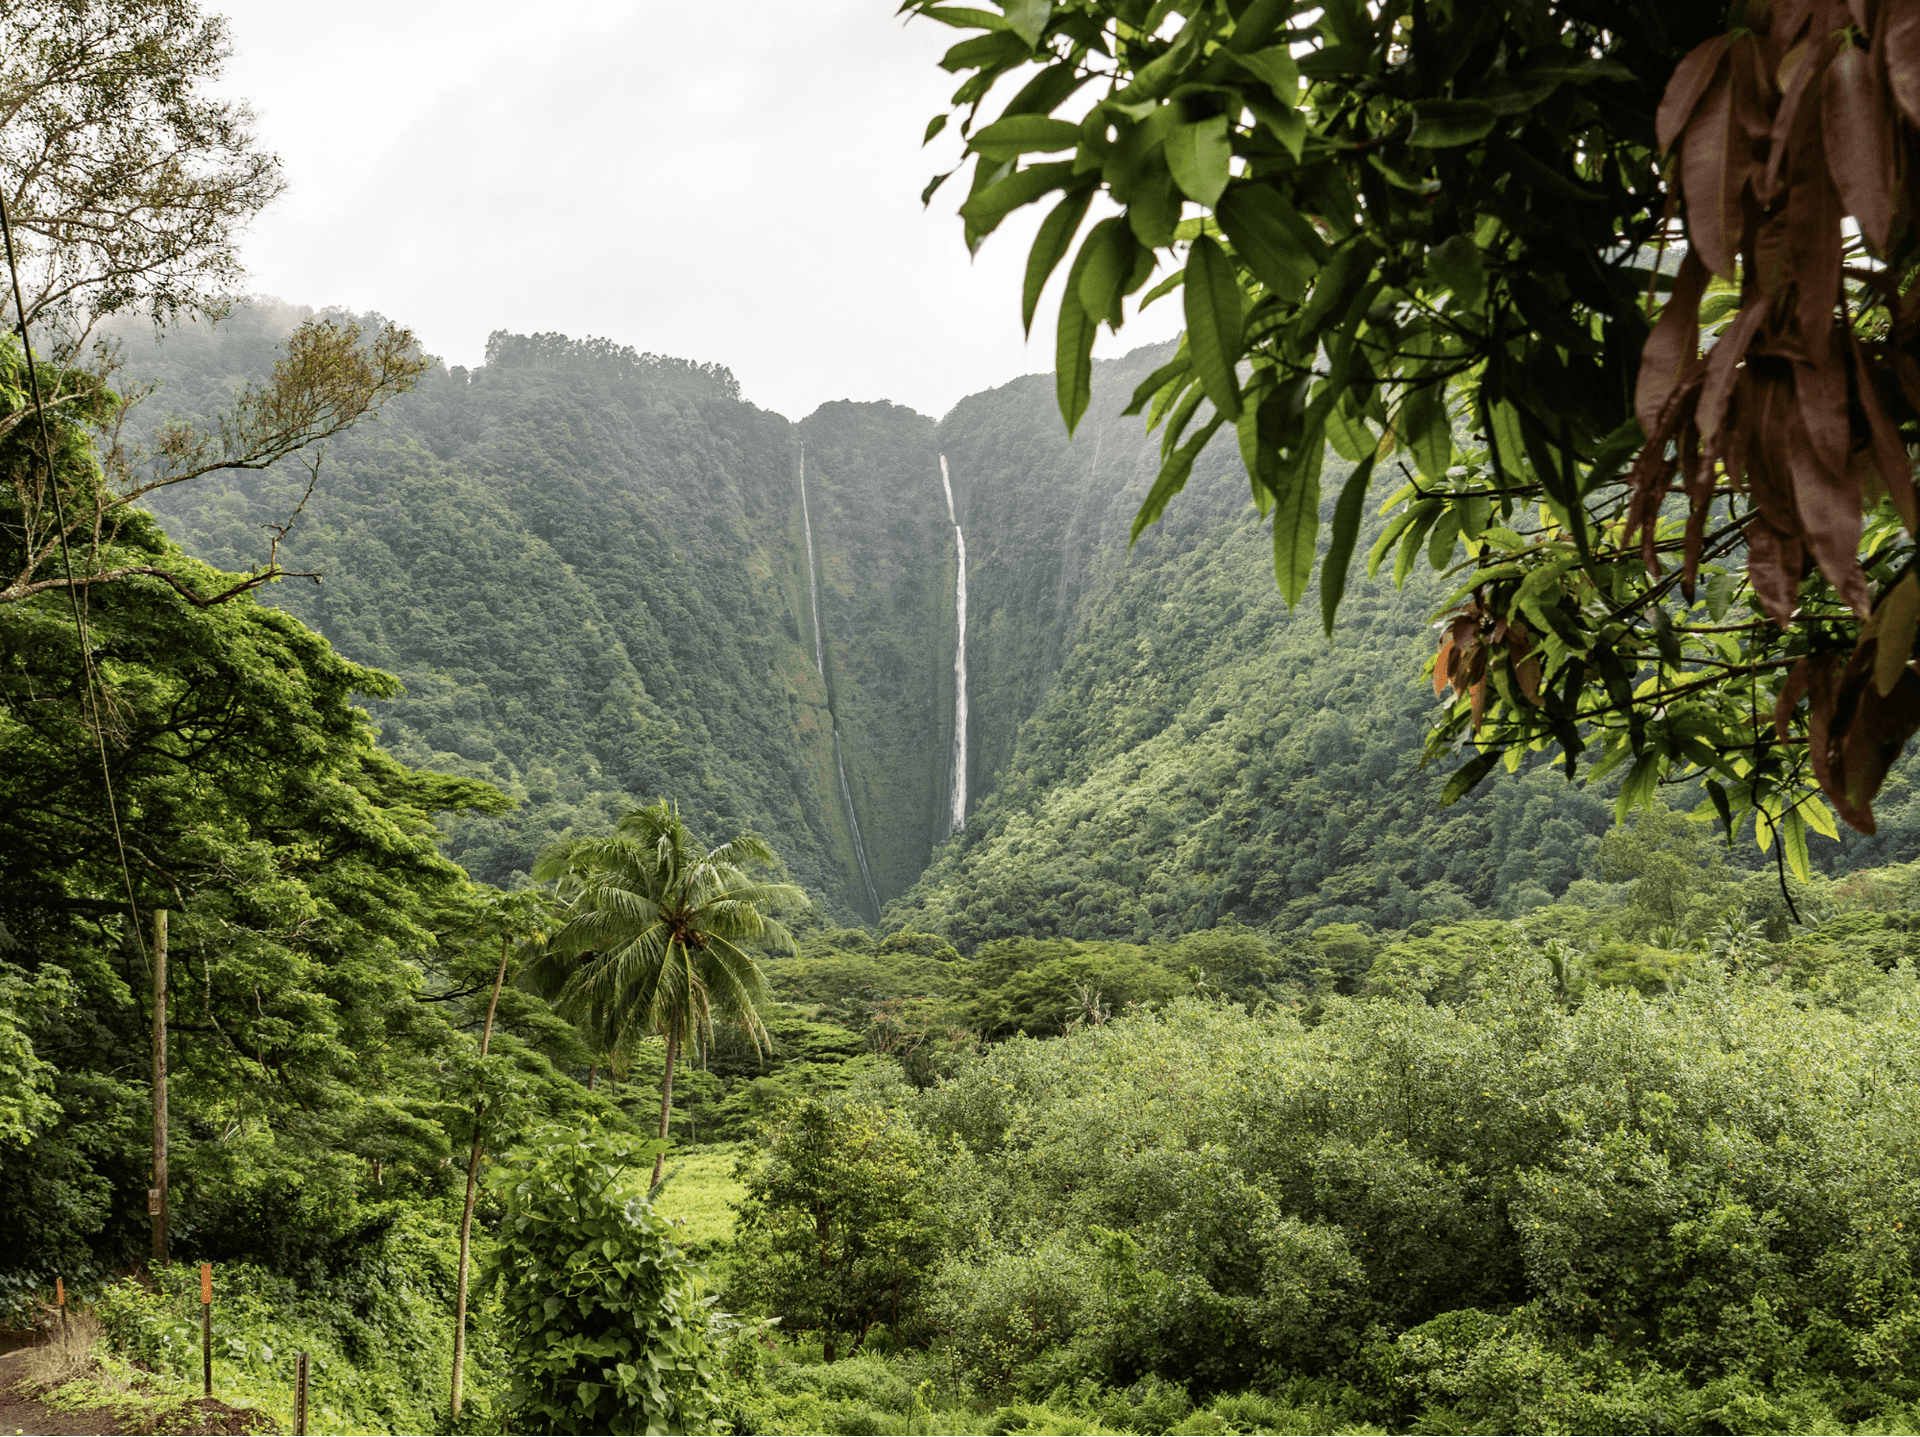 Thanks to Martin Zangirl on Unsplash for this snap of a waterfall in Hawaii.